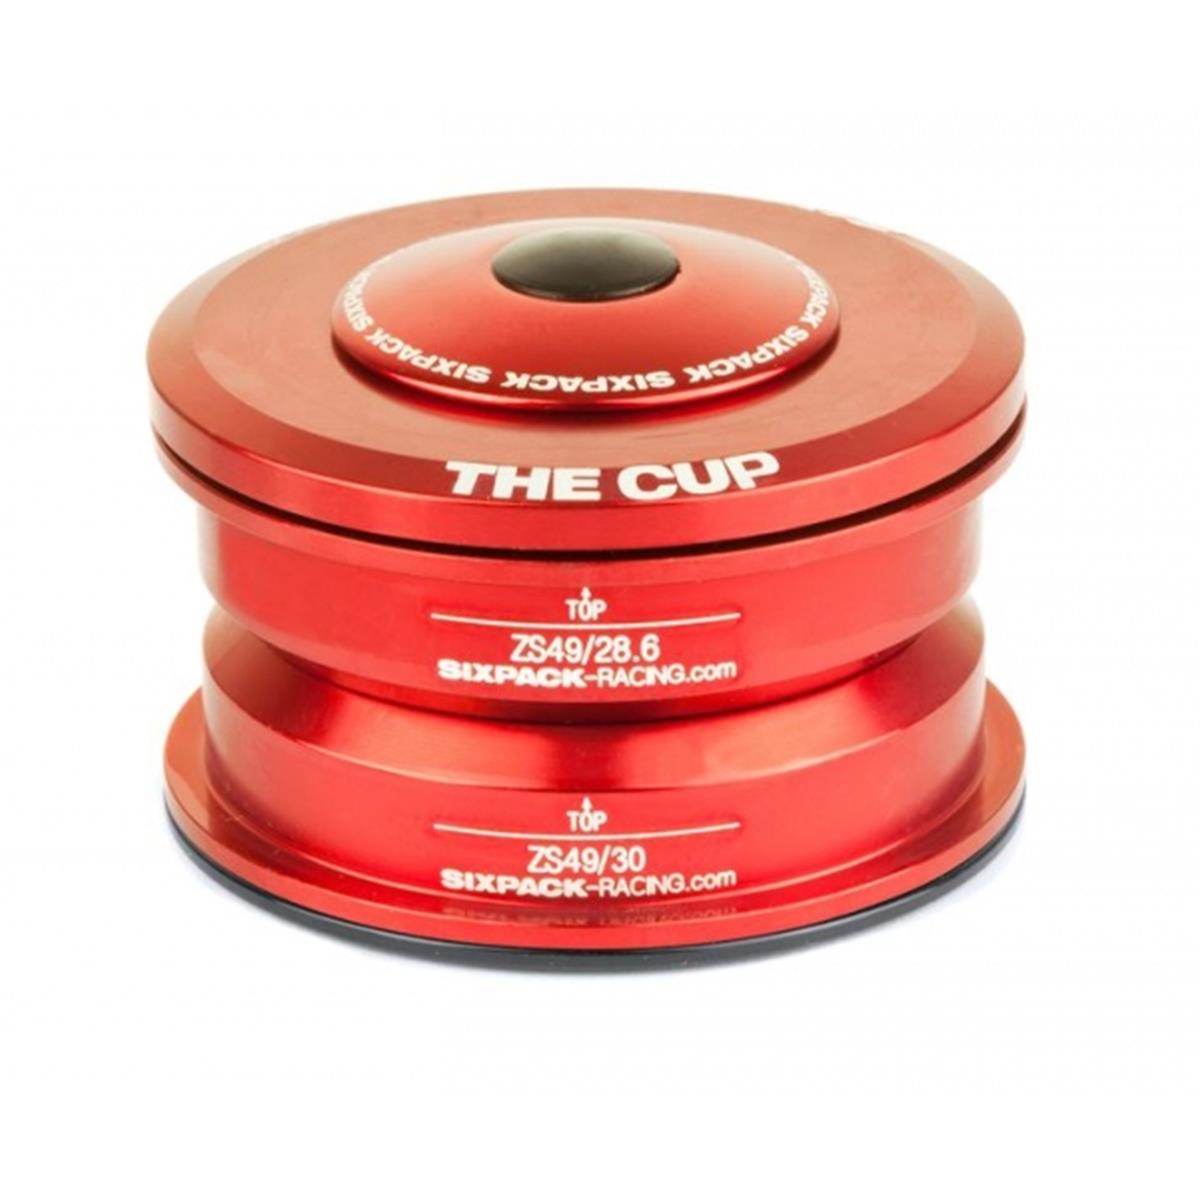 Sixpack Headset The Cup Red, ZS49/28.6 I ZS49/30